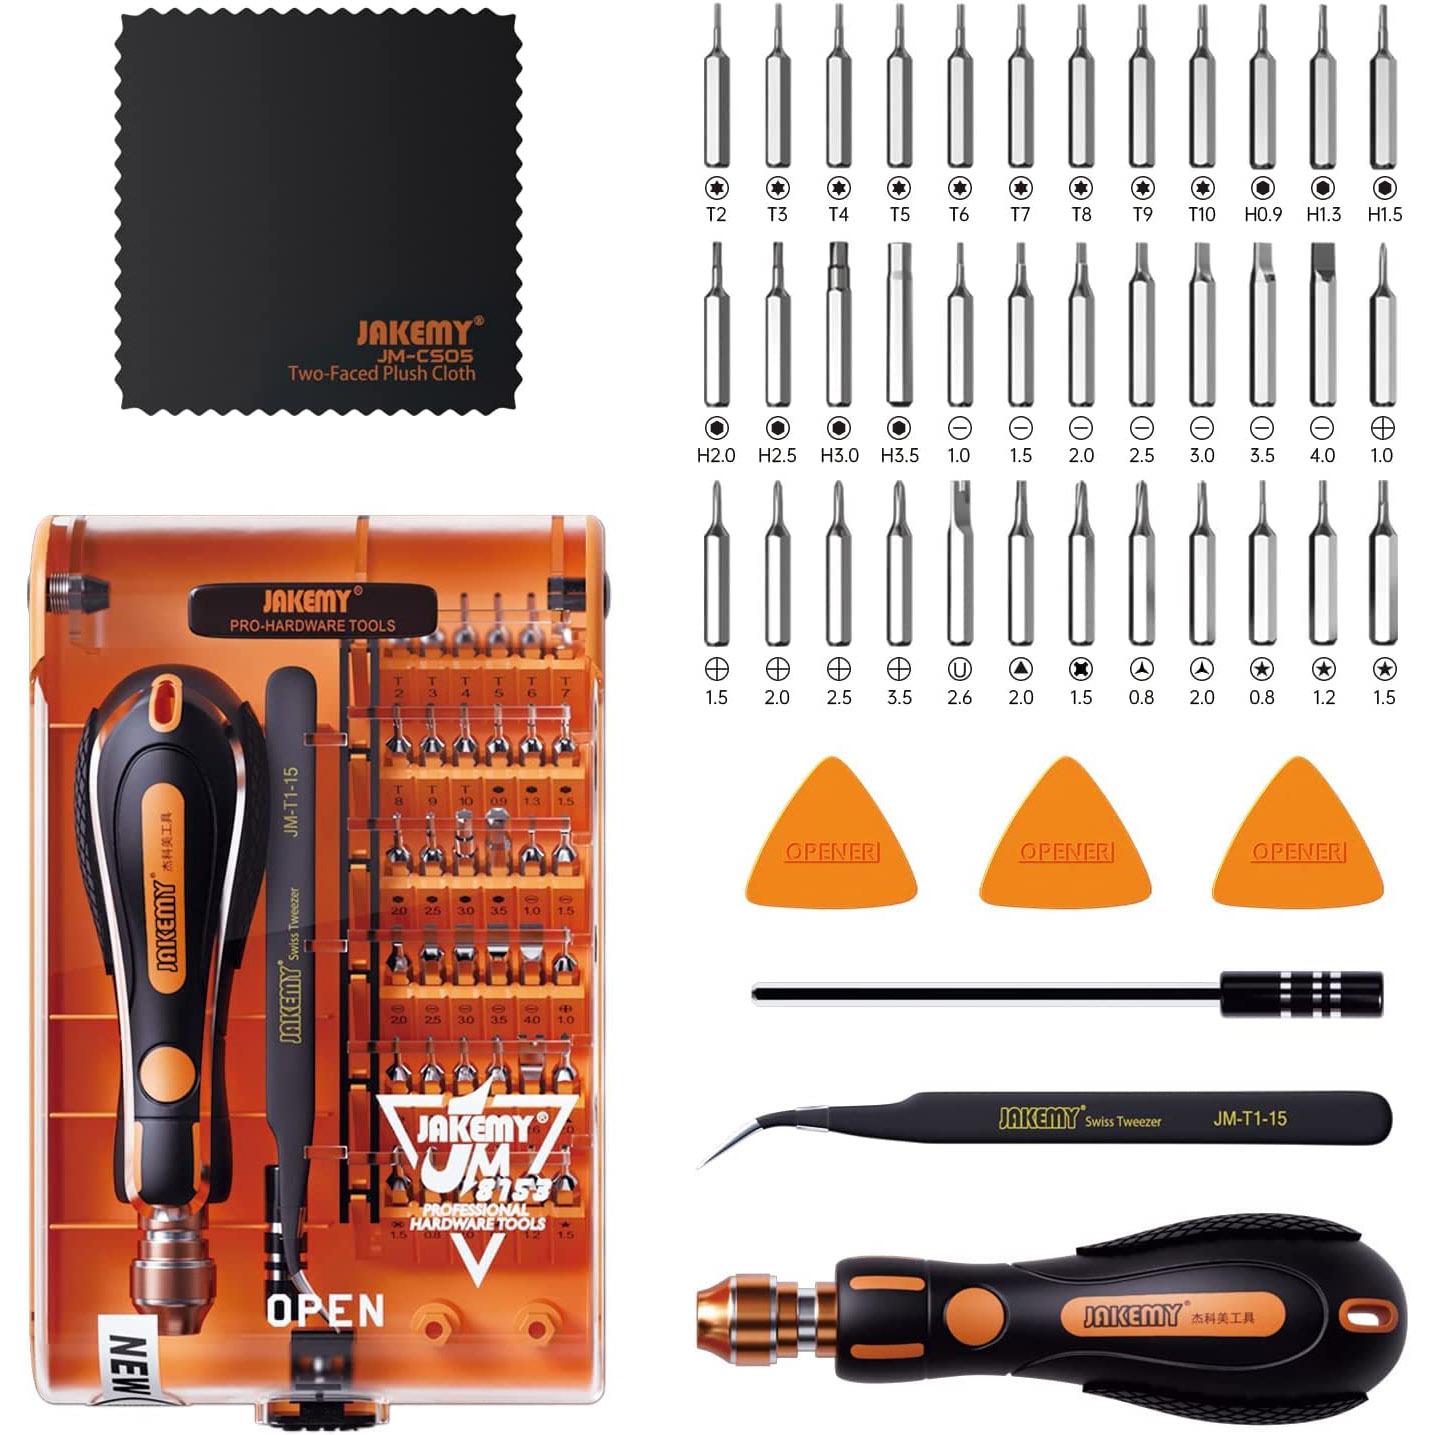 Jakemy Magnetic Precision Screwdriver Set for $6.85 Shipped